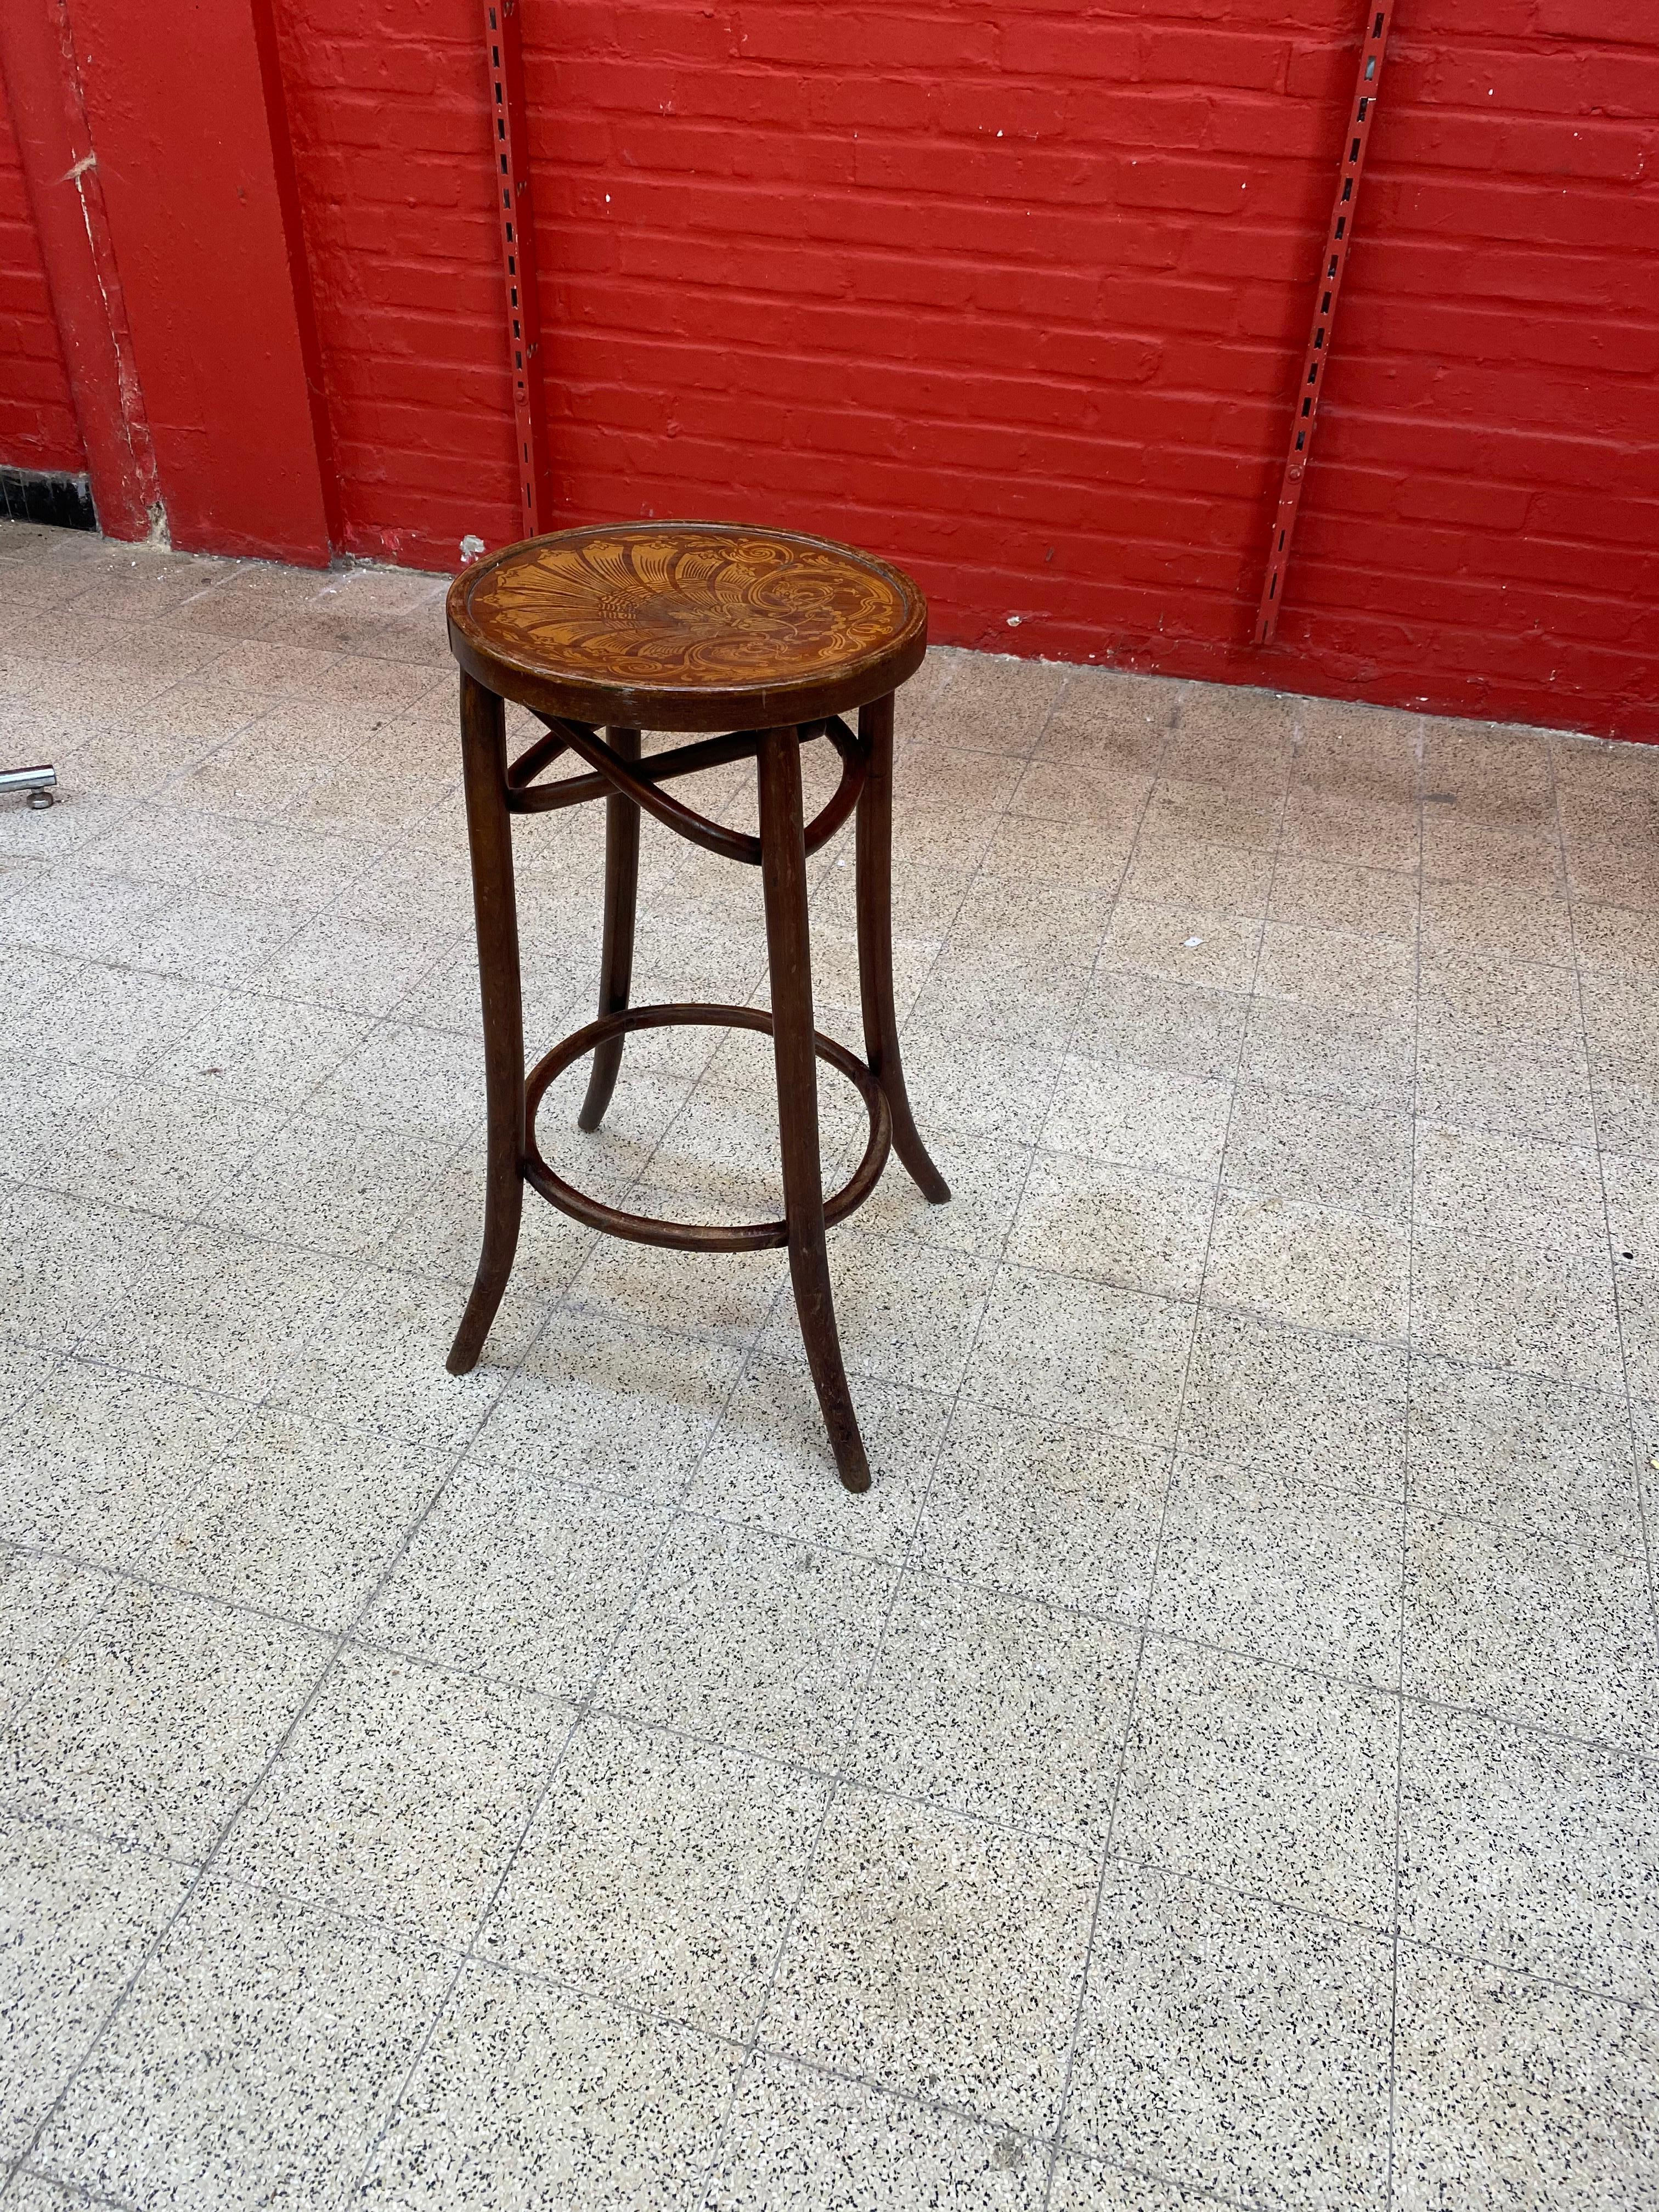 20th Century Art Nouveau Stool in the Style of Thonet, circa 1930 For Sale